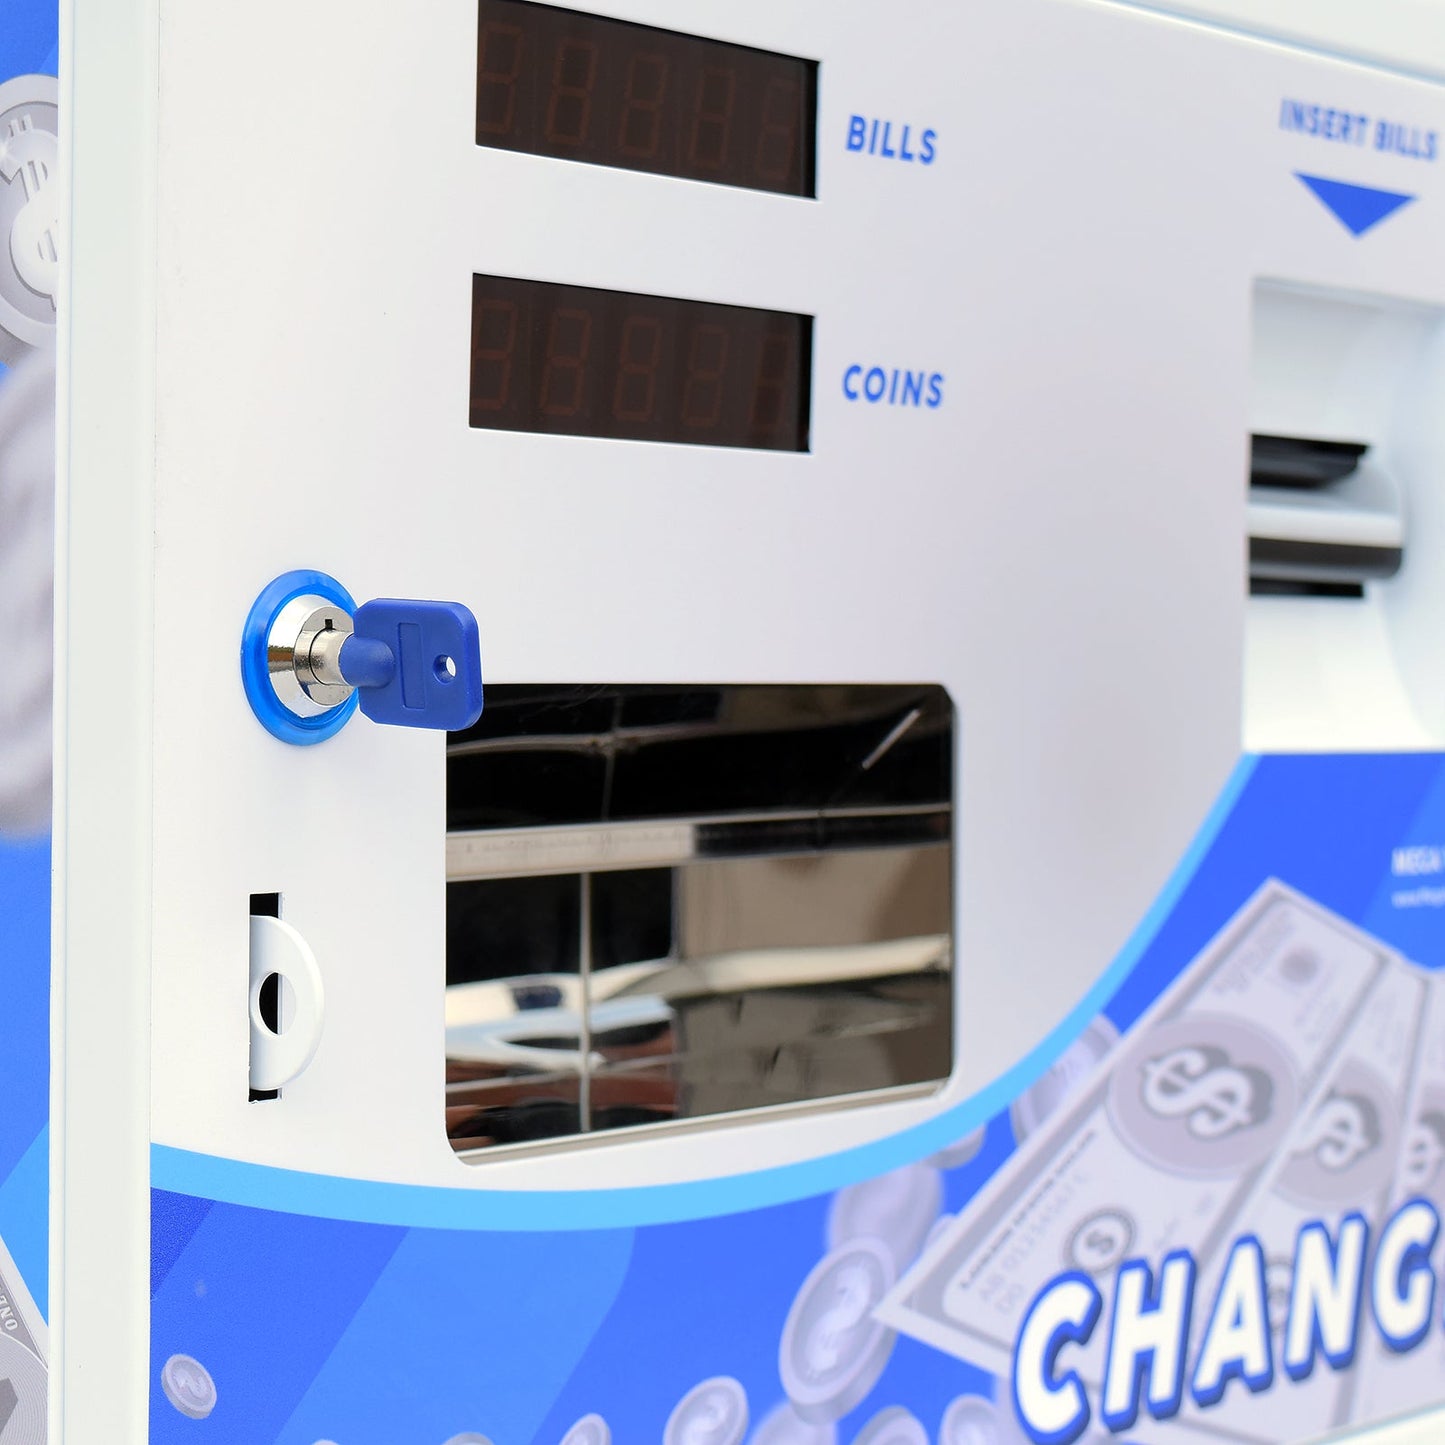 x3 machines of bill to Coin Changer